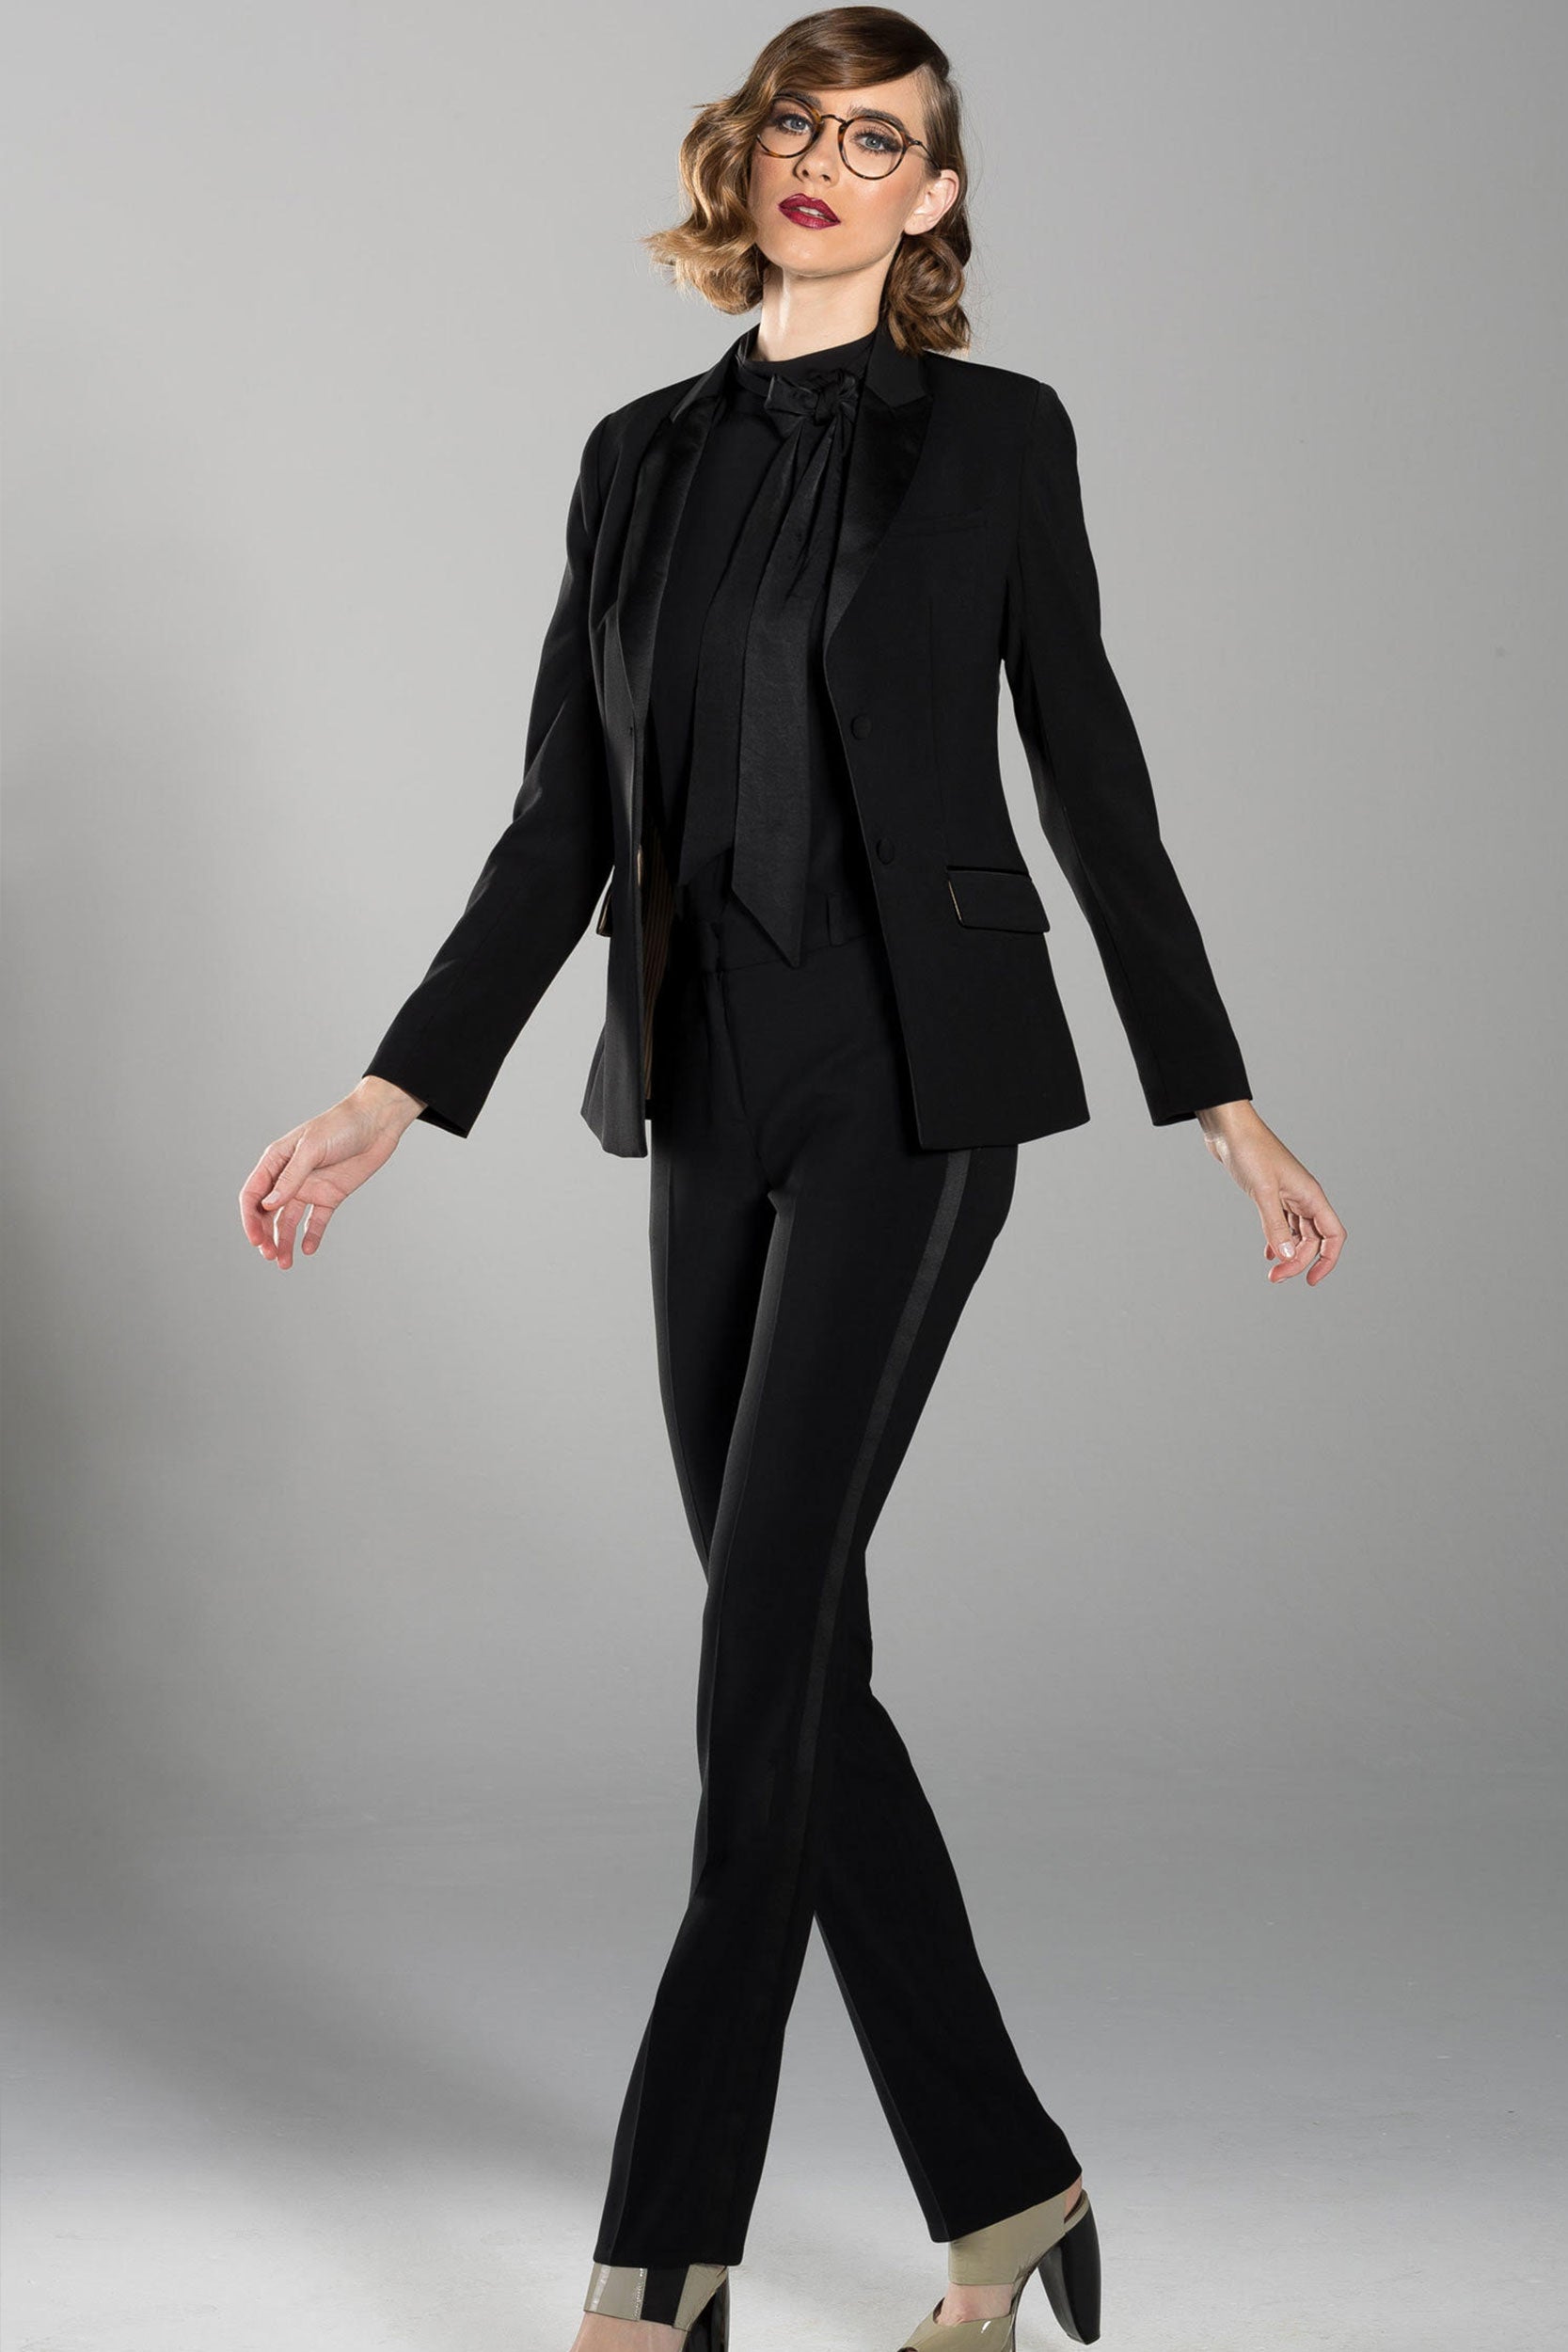 luvamia Black Blazers for Women Suit Jackets Dressy 3/4 Sleeve Blazer  Business Casual Outfits for Work Size M Fit Size 8 Size 10 - Walmart.com